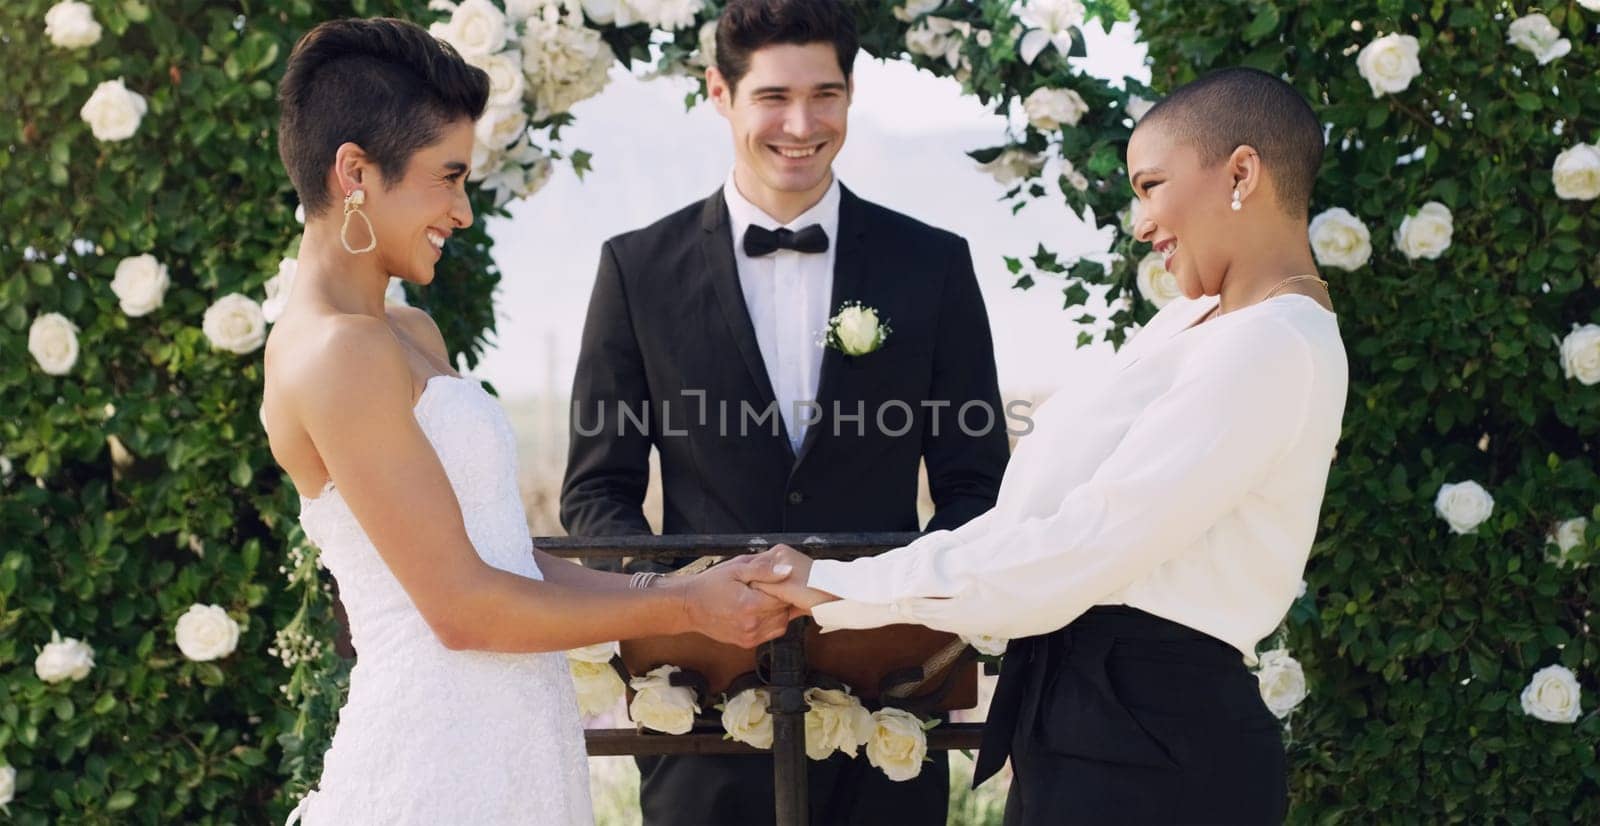 Love, holding hands and gay with lesbian couple at wedding for celebration, lgbtq and pride. Smile, spring and happiness with women at marriage event for partner commitment, romance and freedom by YuriArcurs